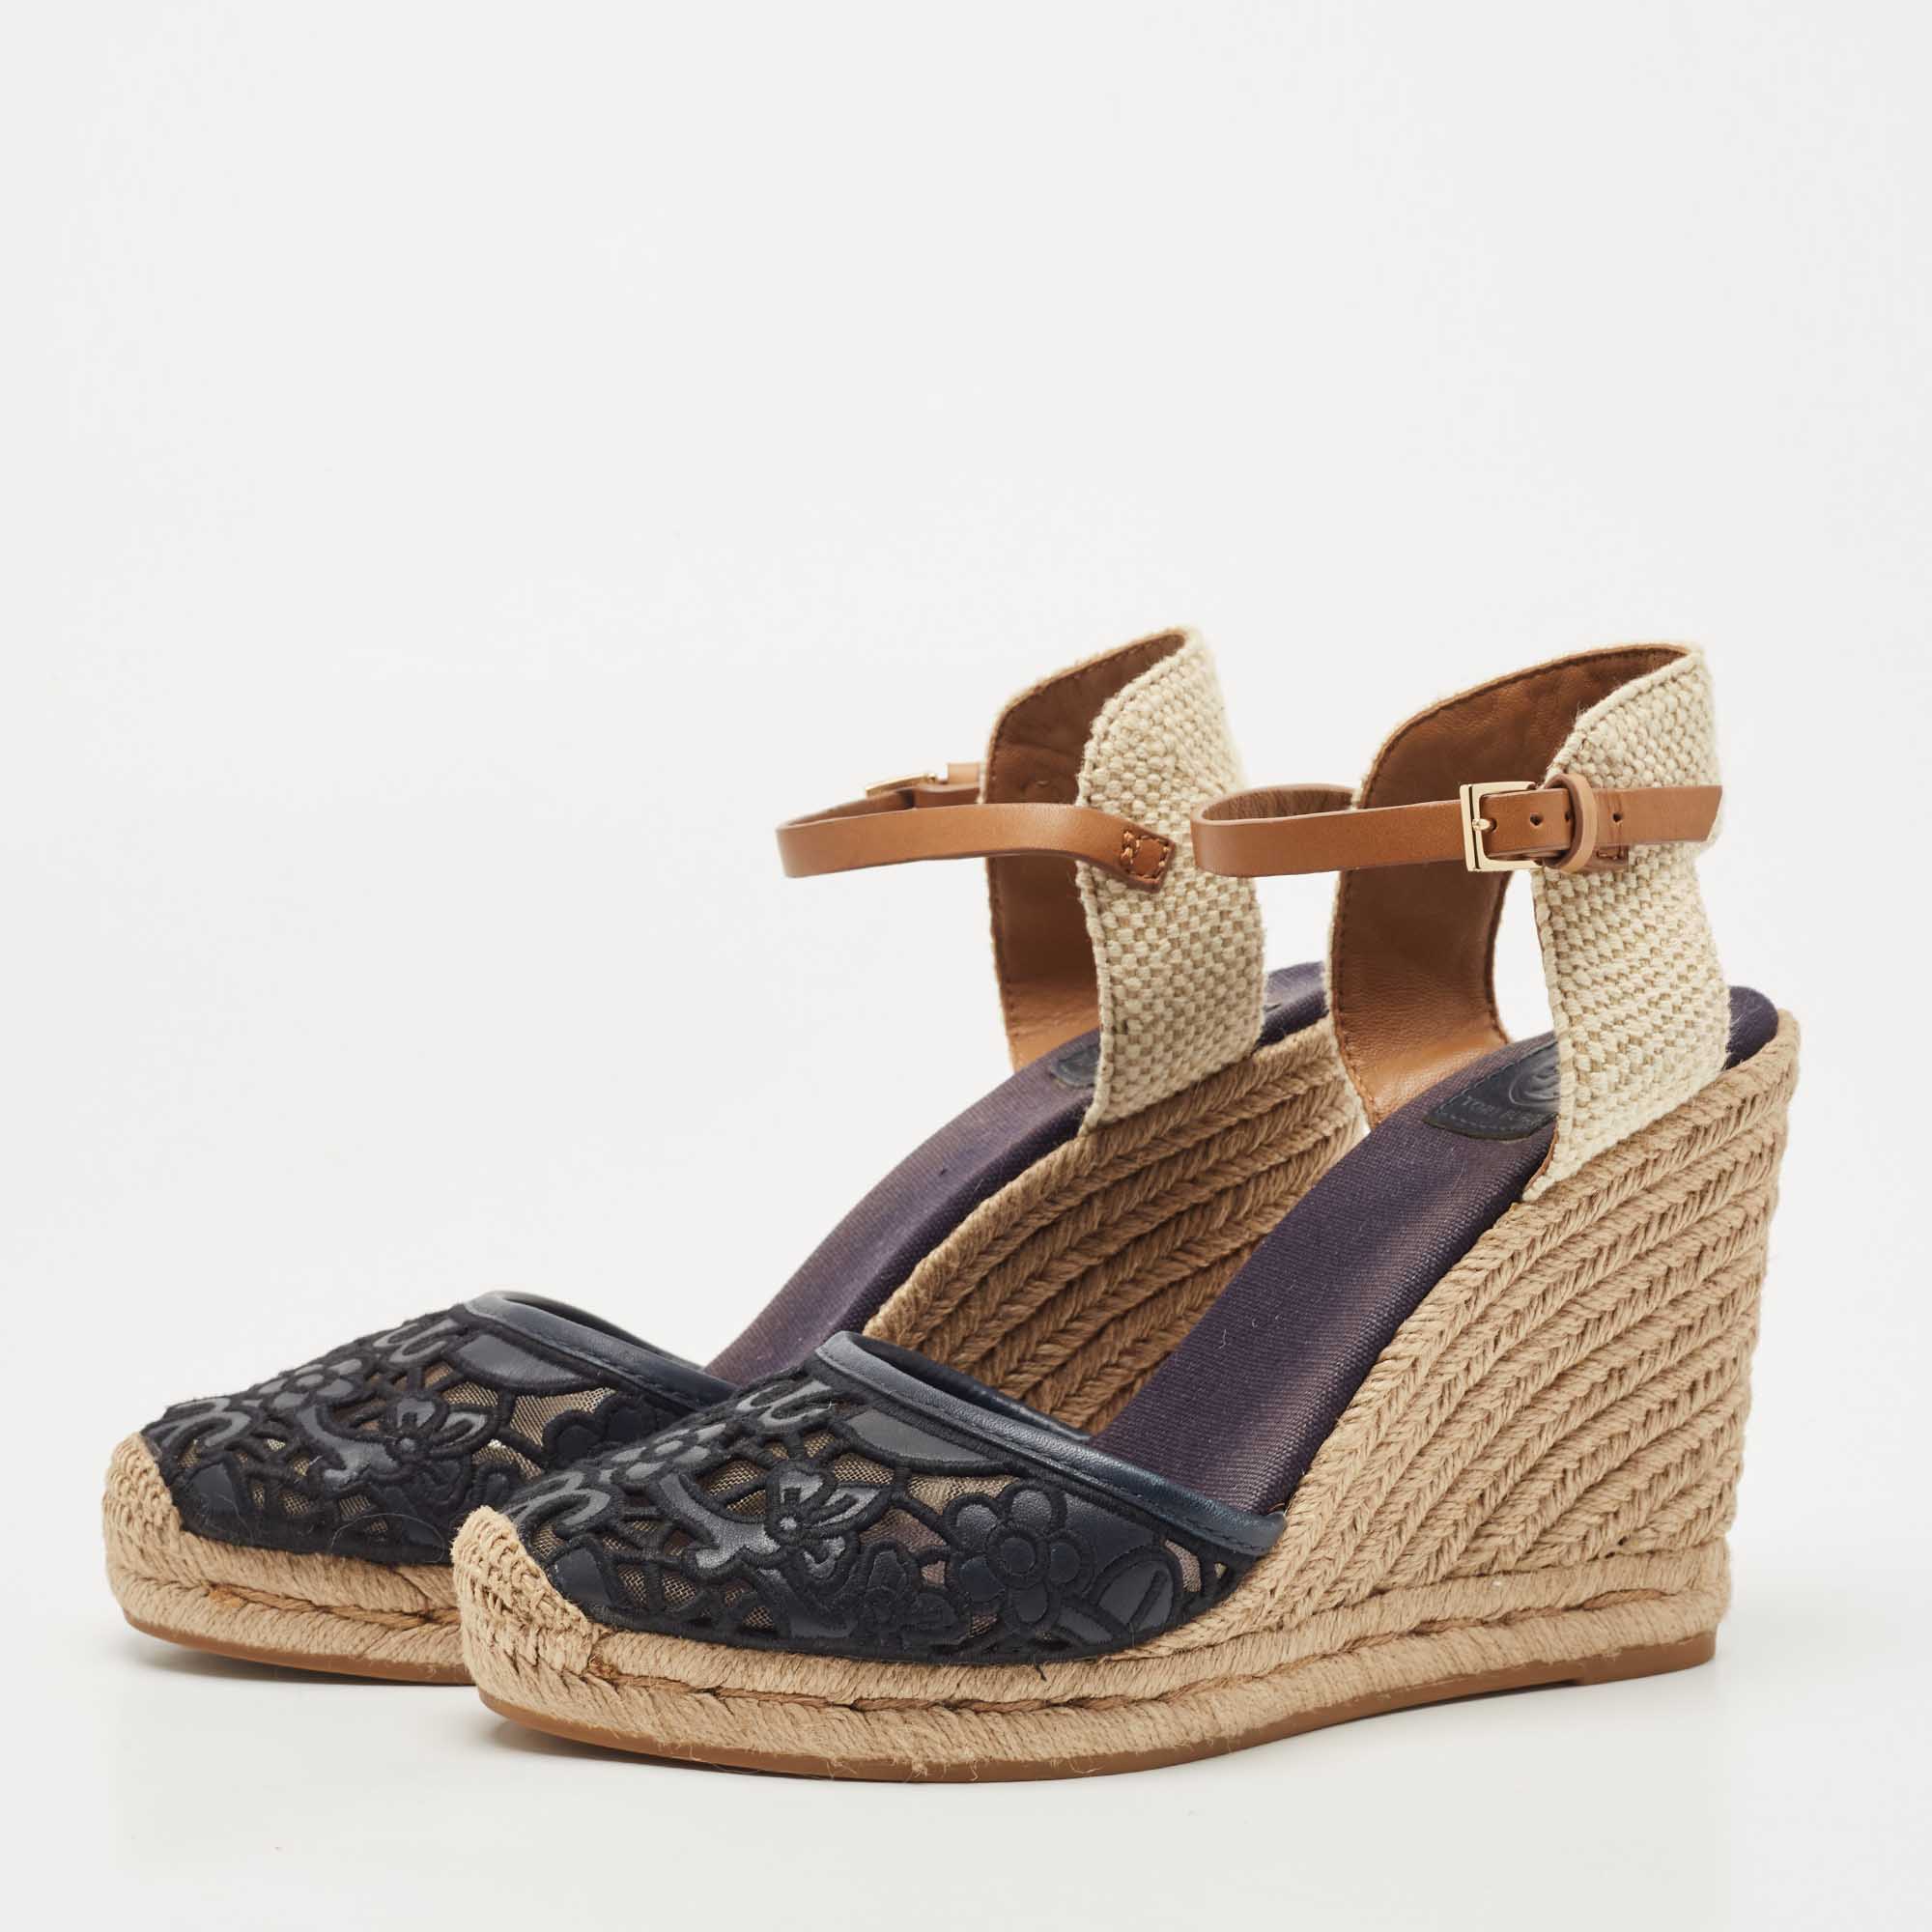 

Tory Burch Navy Blue/Beige Leather and Net Fabric Wedge Espadrille Sandals Size